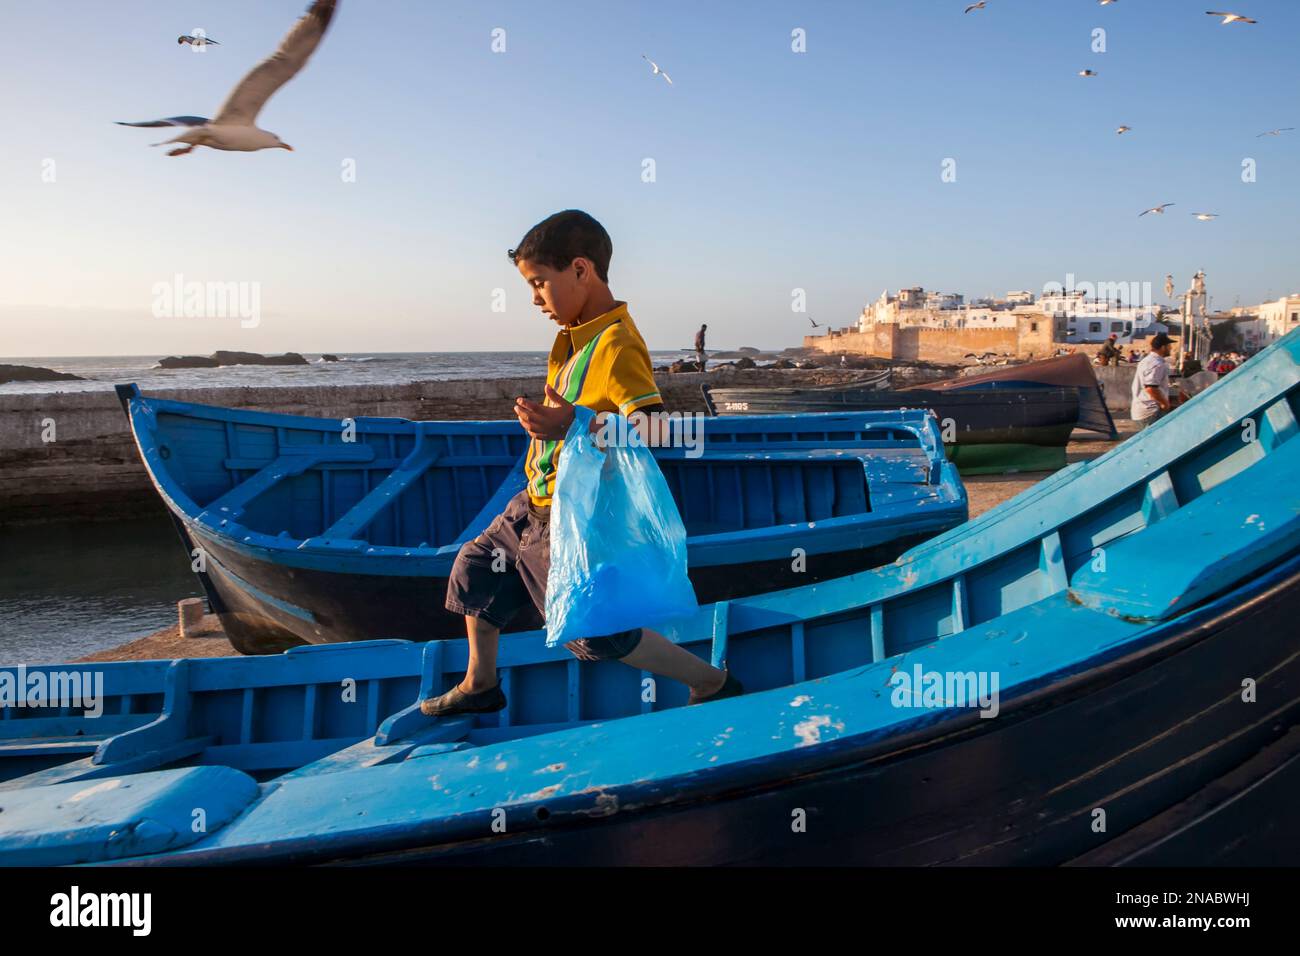 A young boy gingerly traverses a boat on the waterfront of Essaouira, Morocco; Essaouira, Morocco Stock Photo